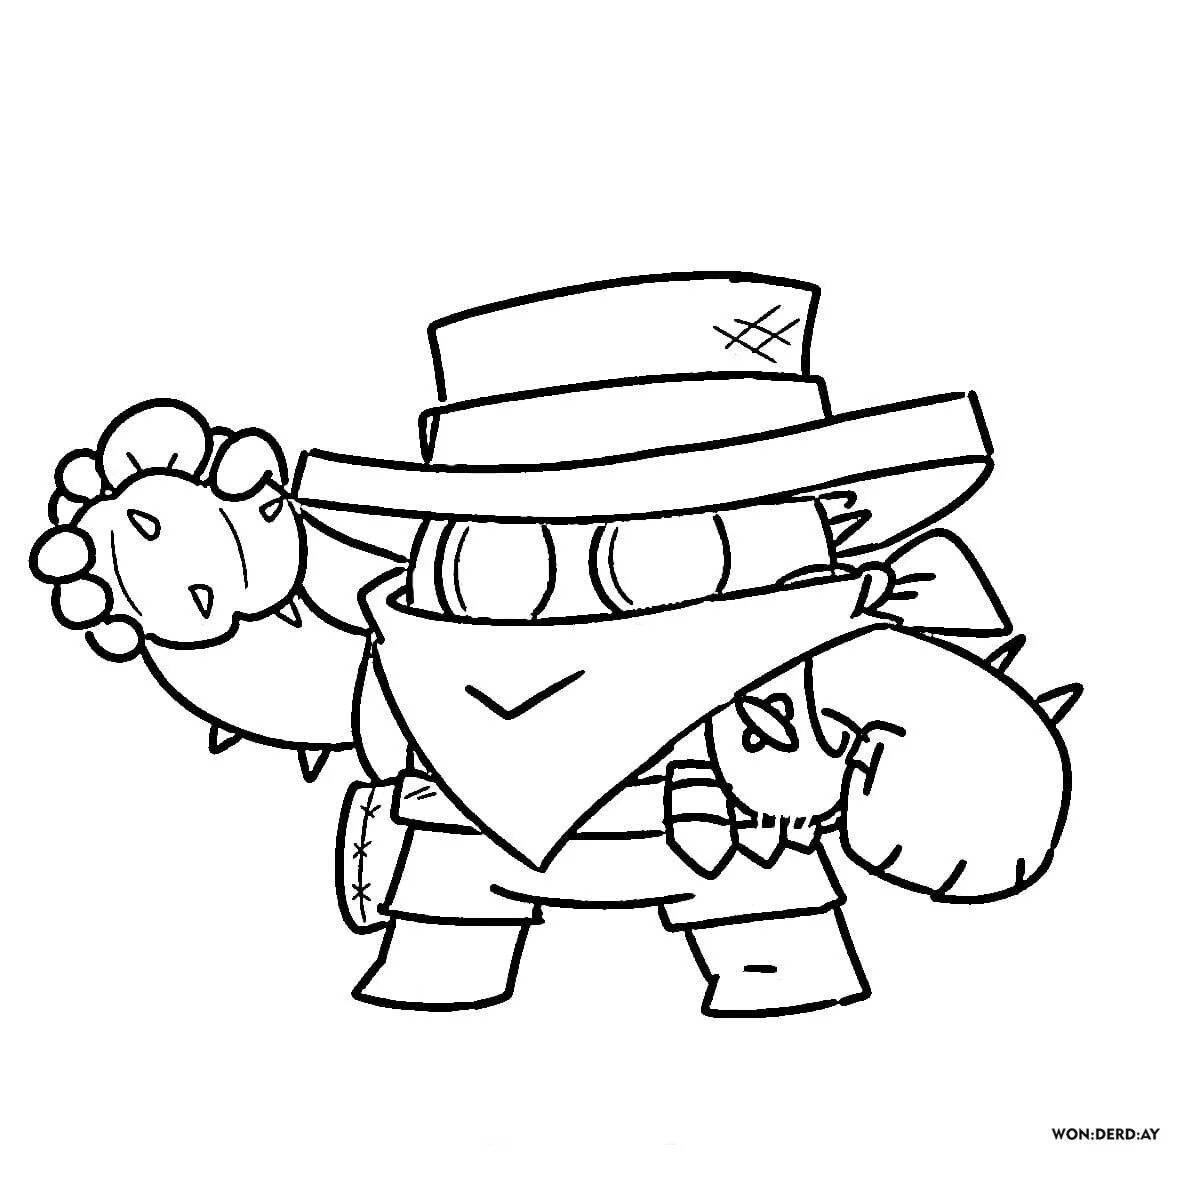 Coloring page amazing mortis